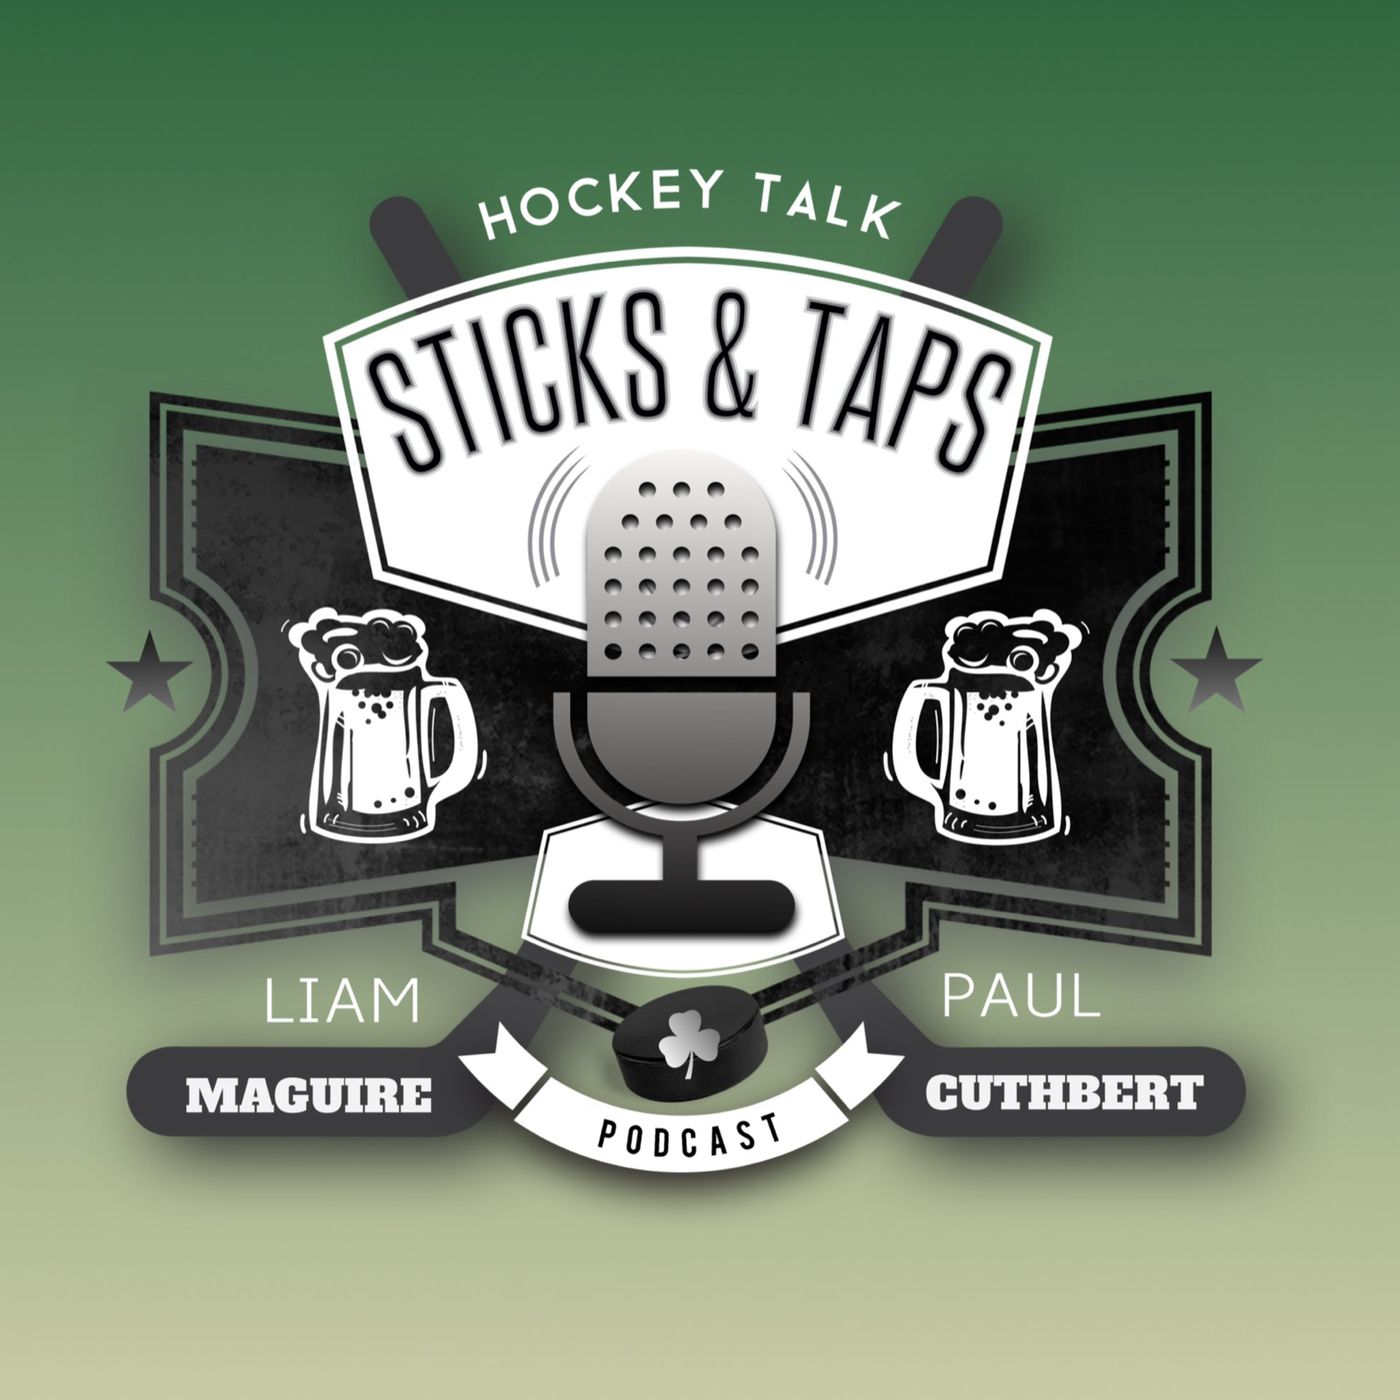 Sticks and Taps - Sn. 2 - Ep. 4 - Honoring Vets, Bad Habs, NHL Best, Eichel, Tkachuk, This Day in Hockey and a Personal Irish Toast!